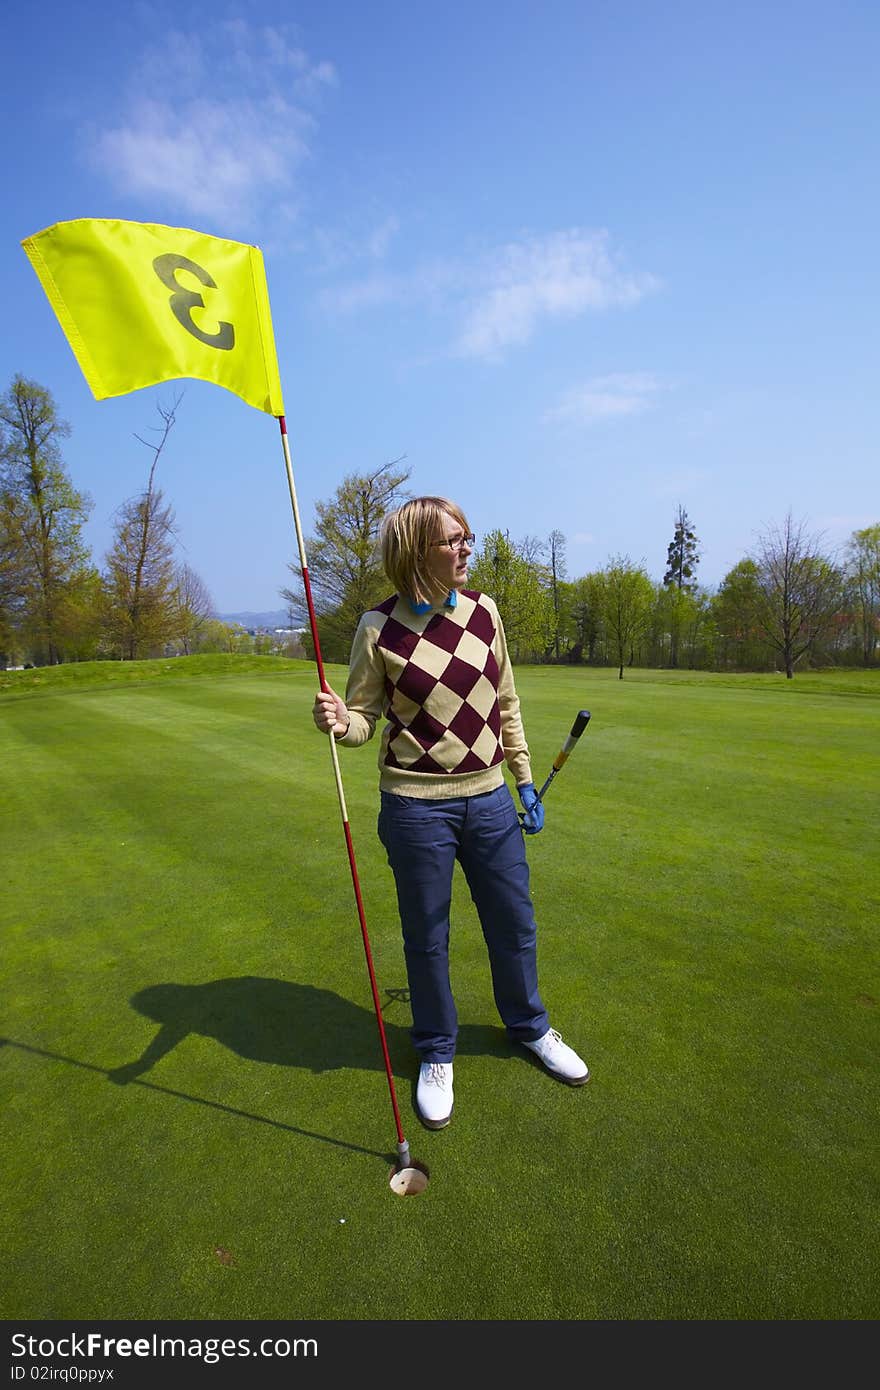 Woman holding a yellow flag number three on a golf course. Woman holding a yellow flag number three on a golf course.